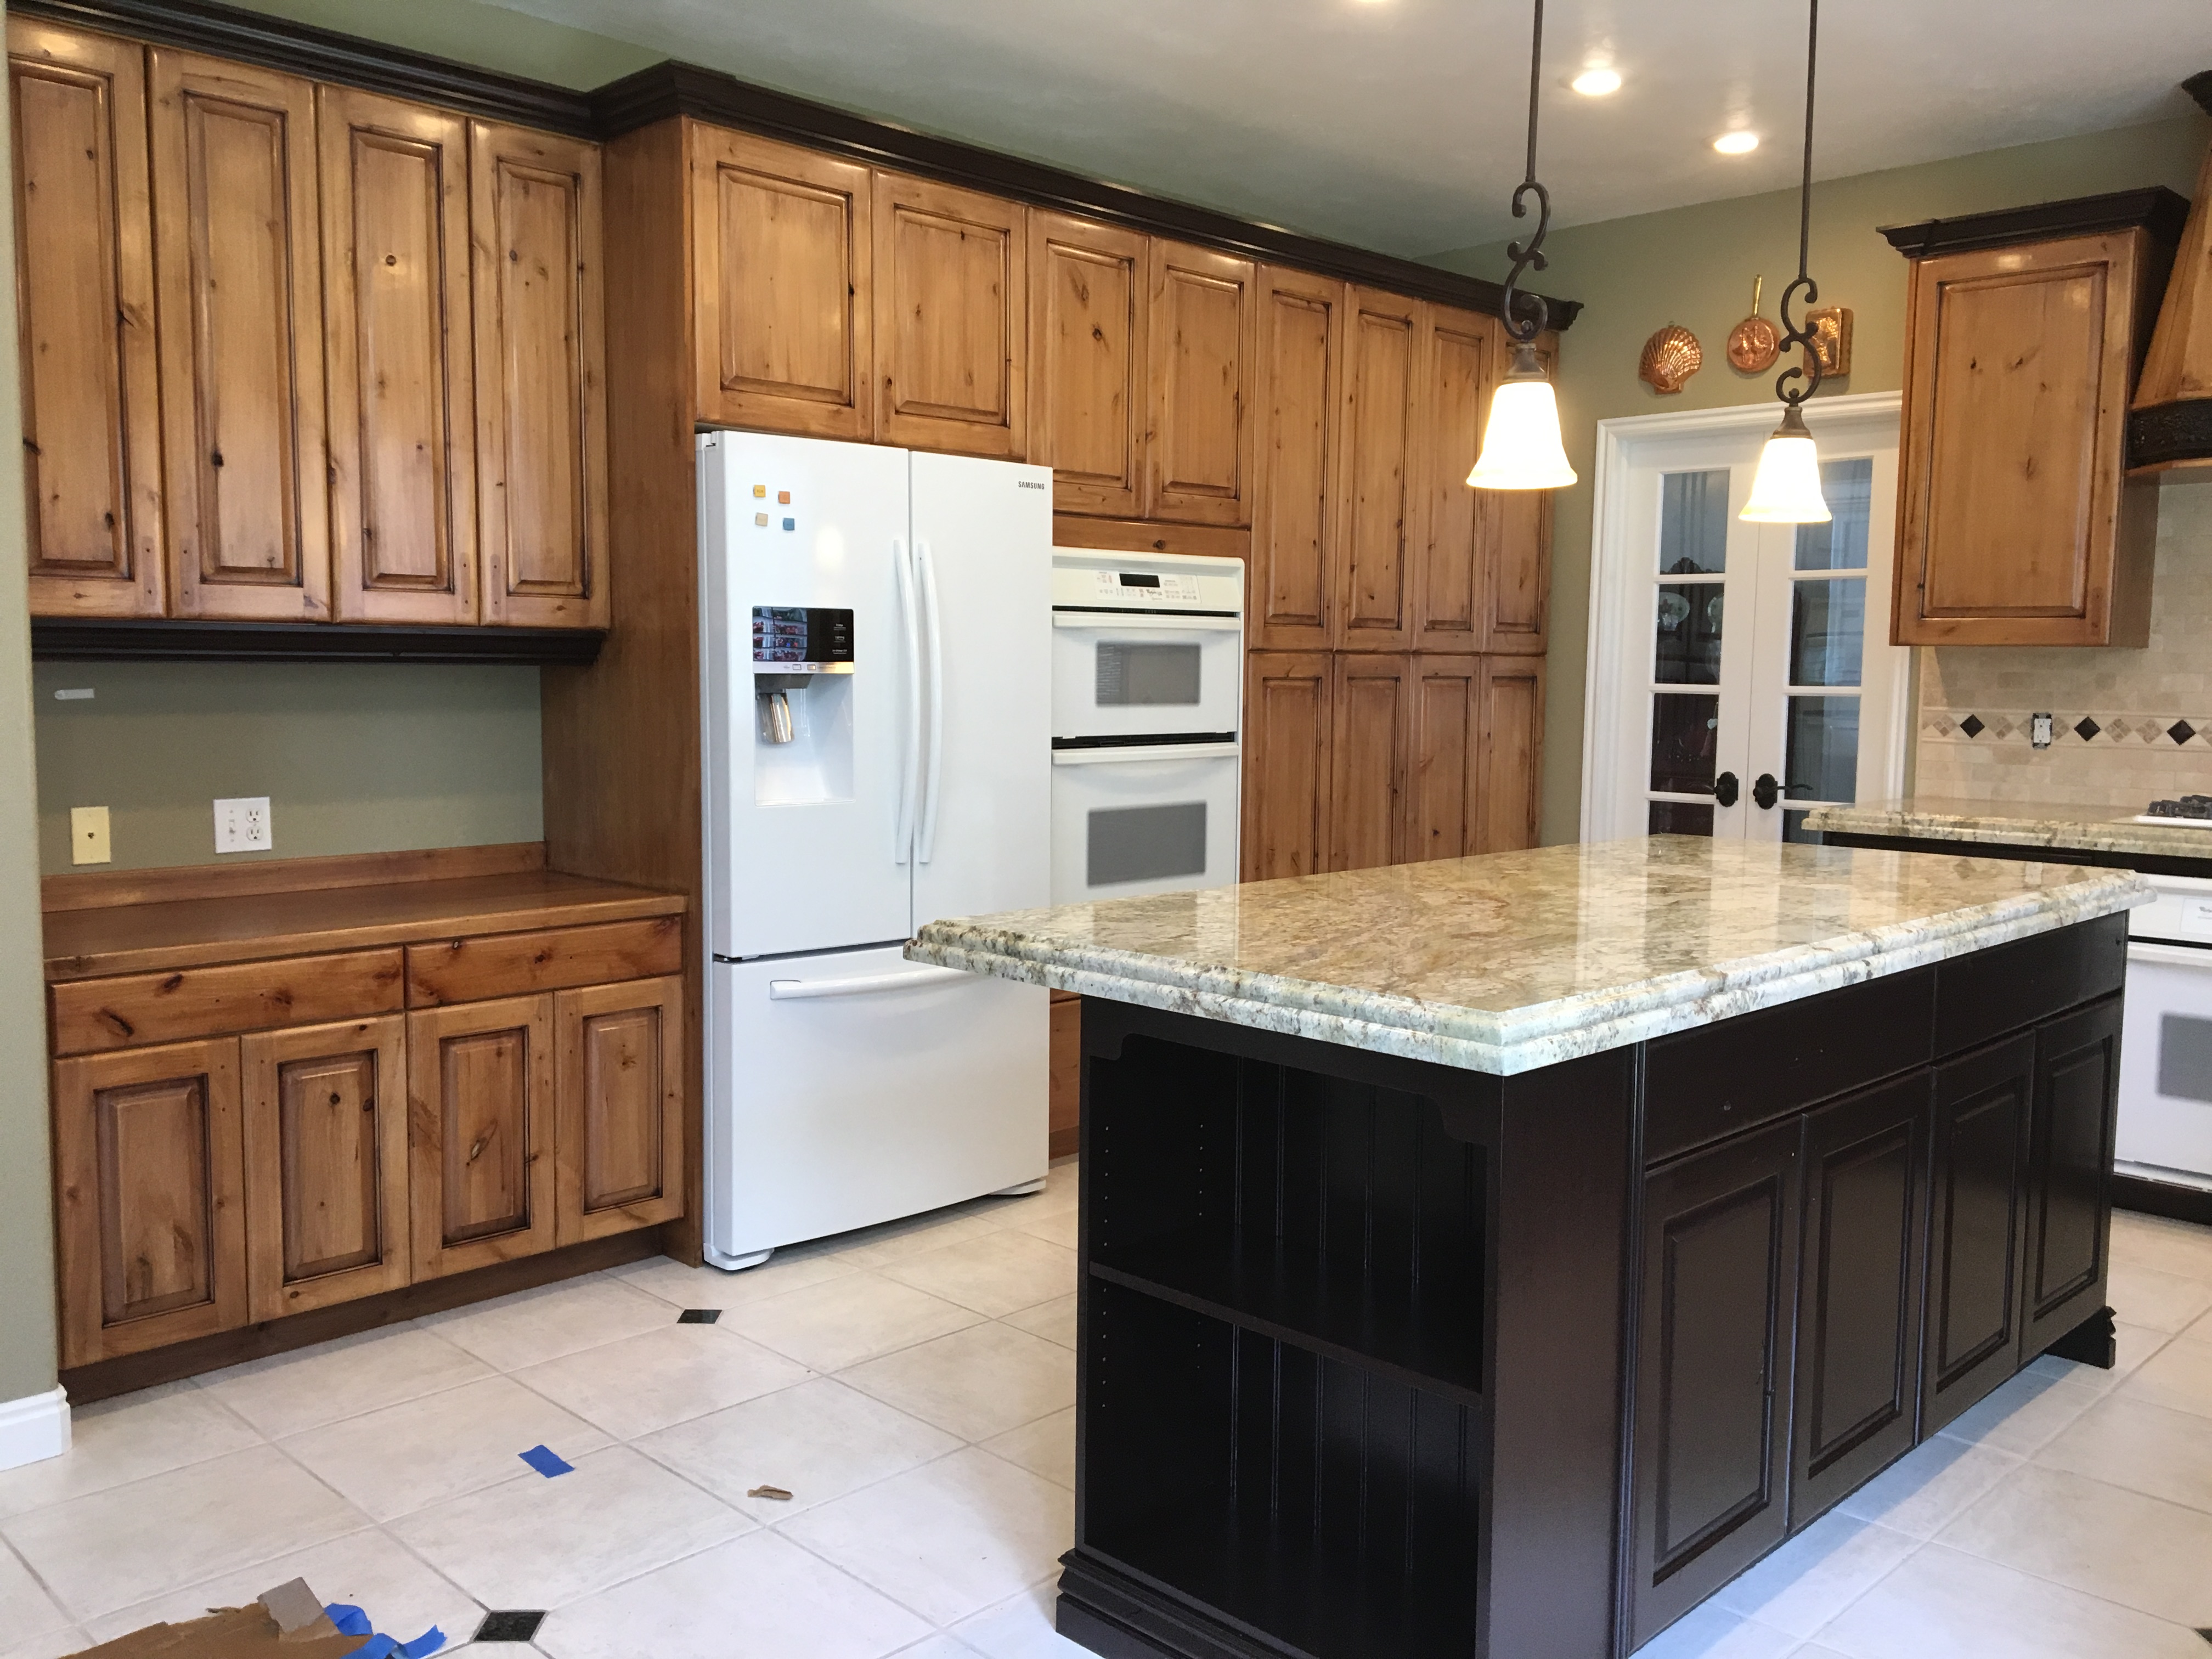 New Resurfacing Kitchen Cabinets for Small Space